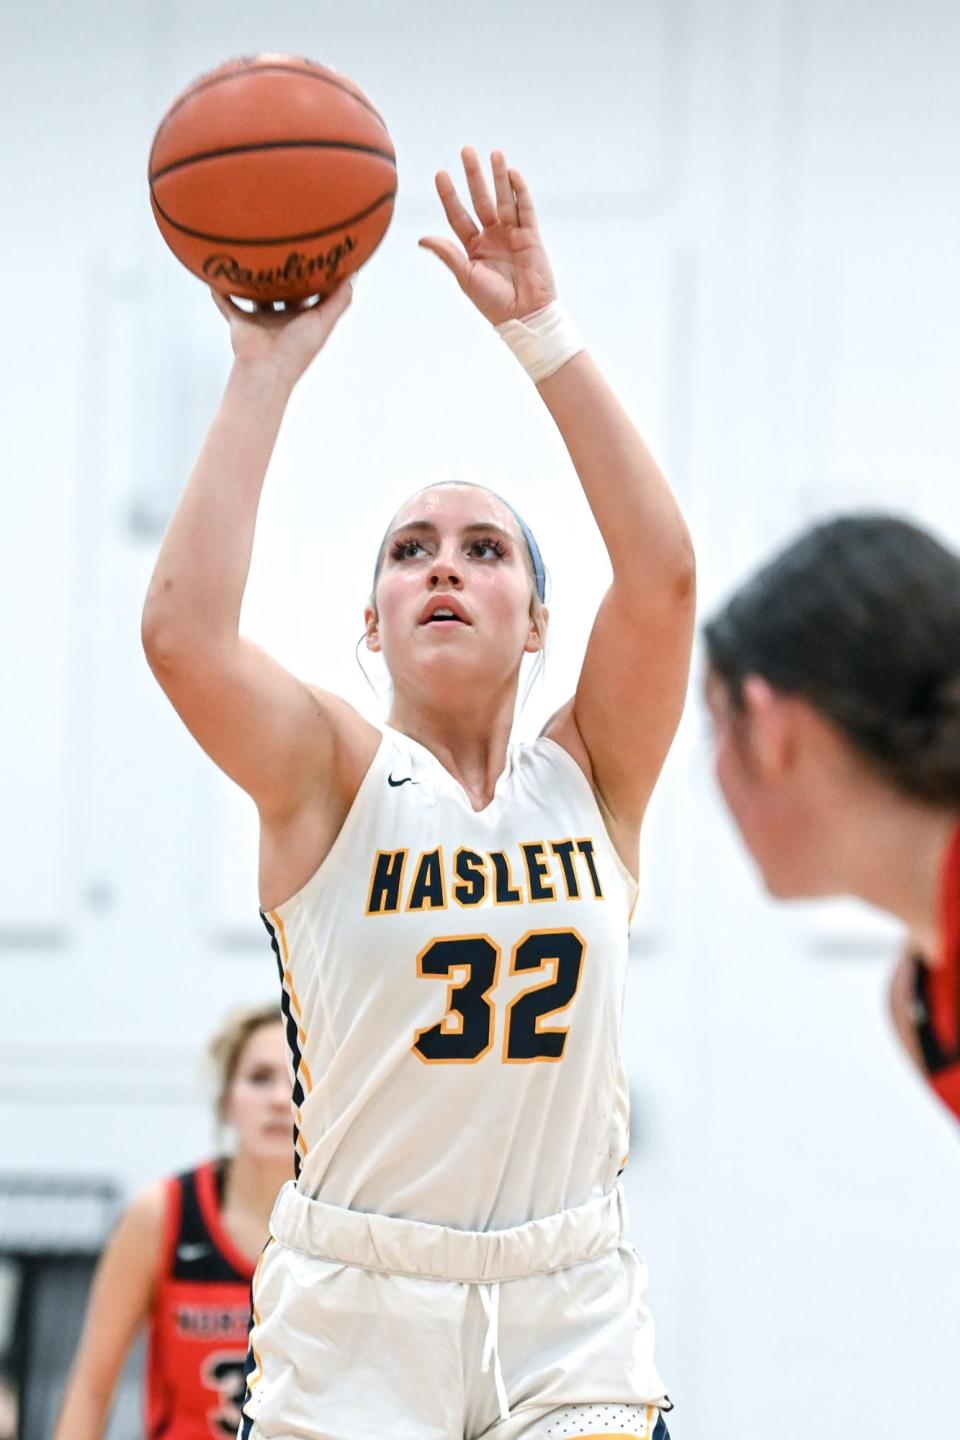 Haslett's Grace Isenhath makes a free throw against Jackson Northwest during the fourth quarter on Tuesday, Nov. 29, 2022, at Haslett High School.